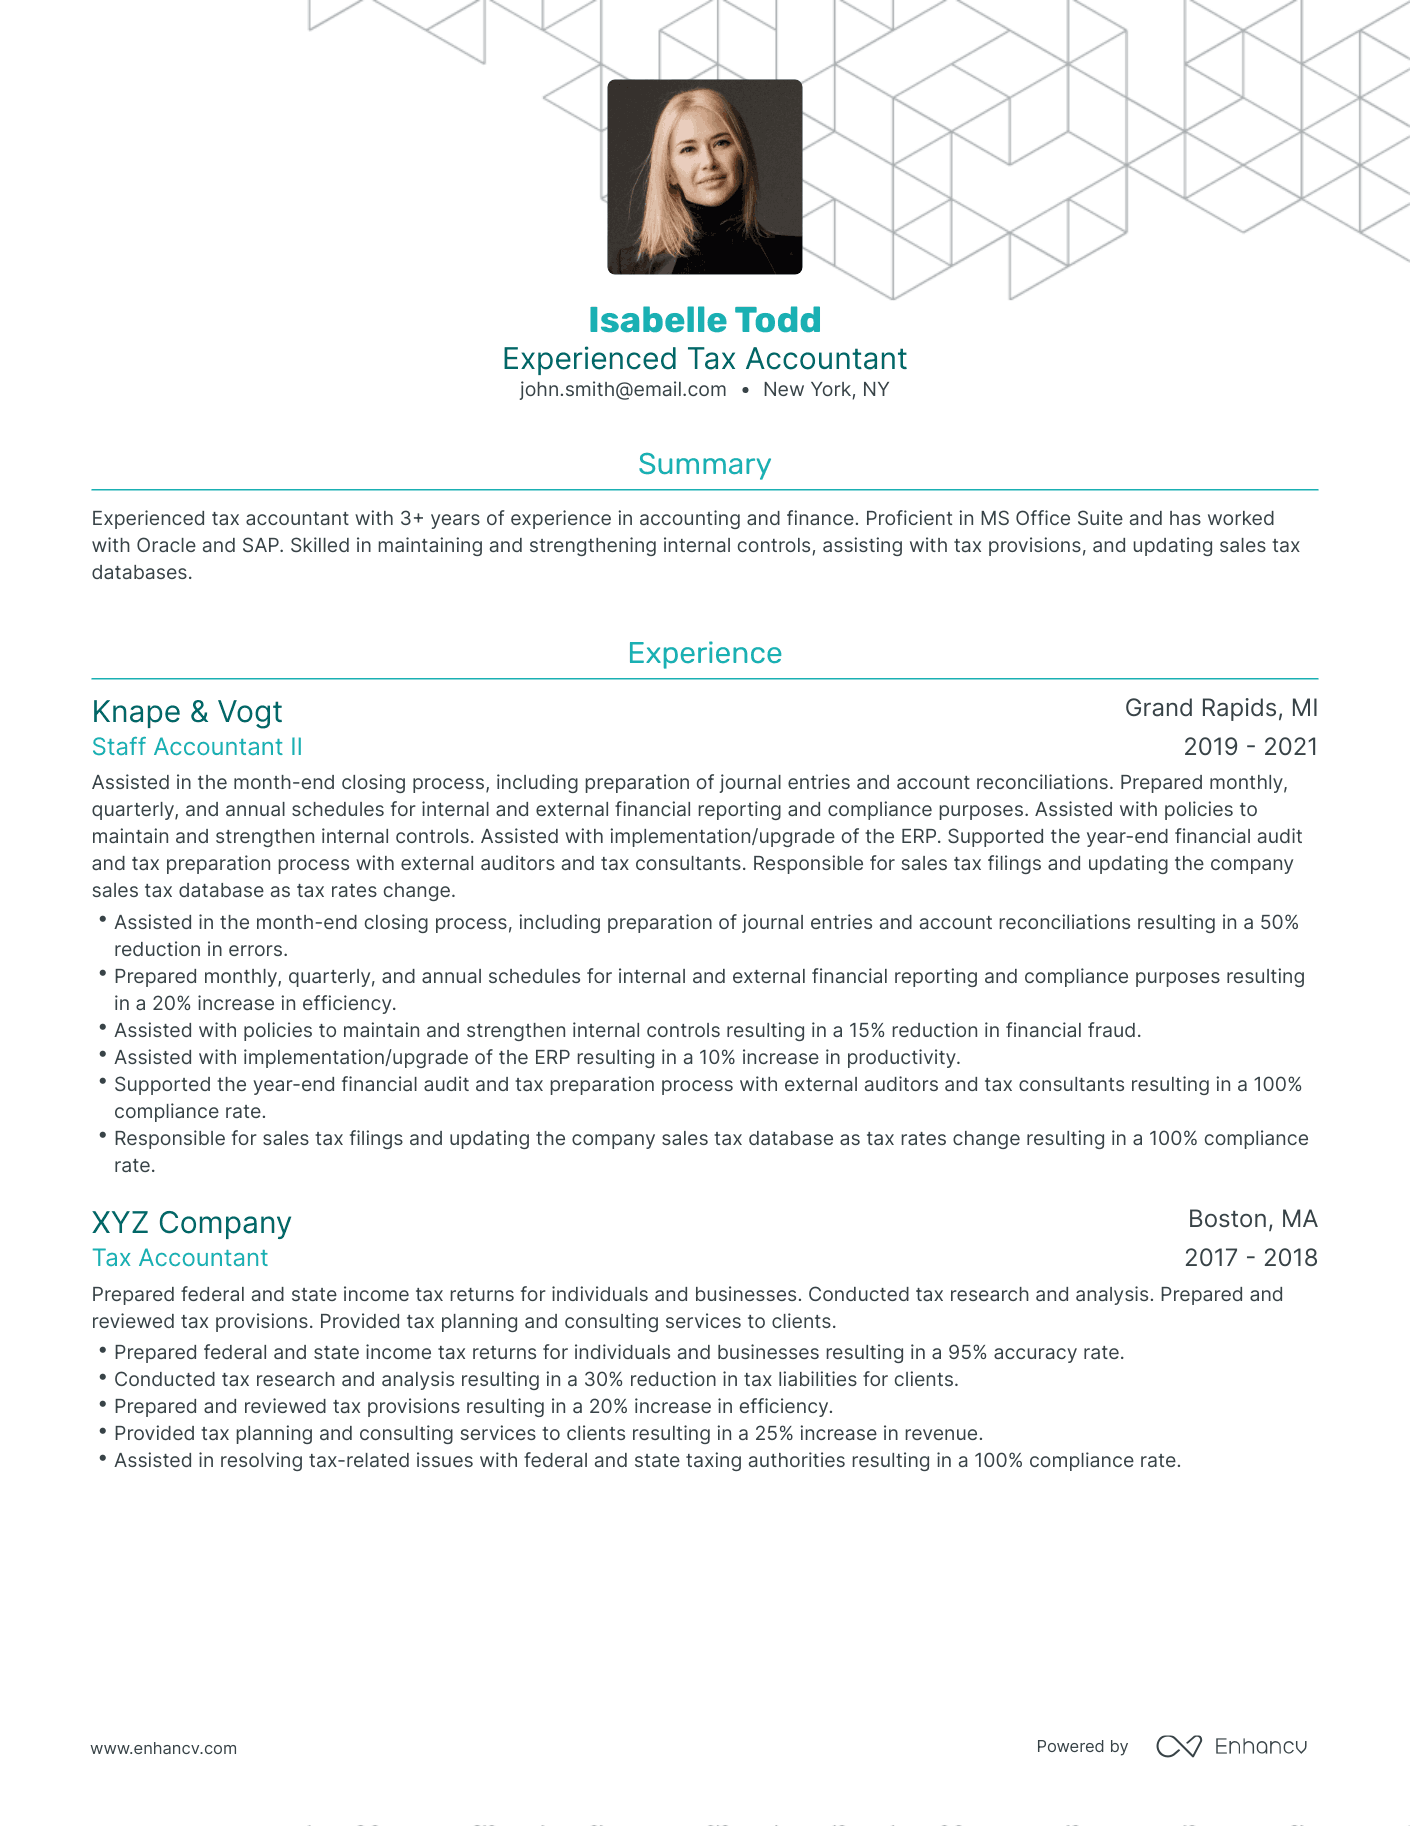 Traditional Tax Accountant Resume Template